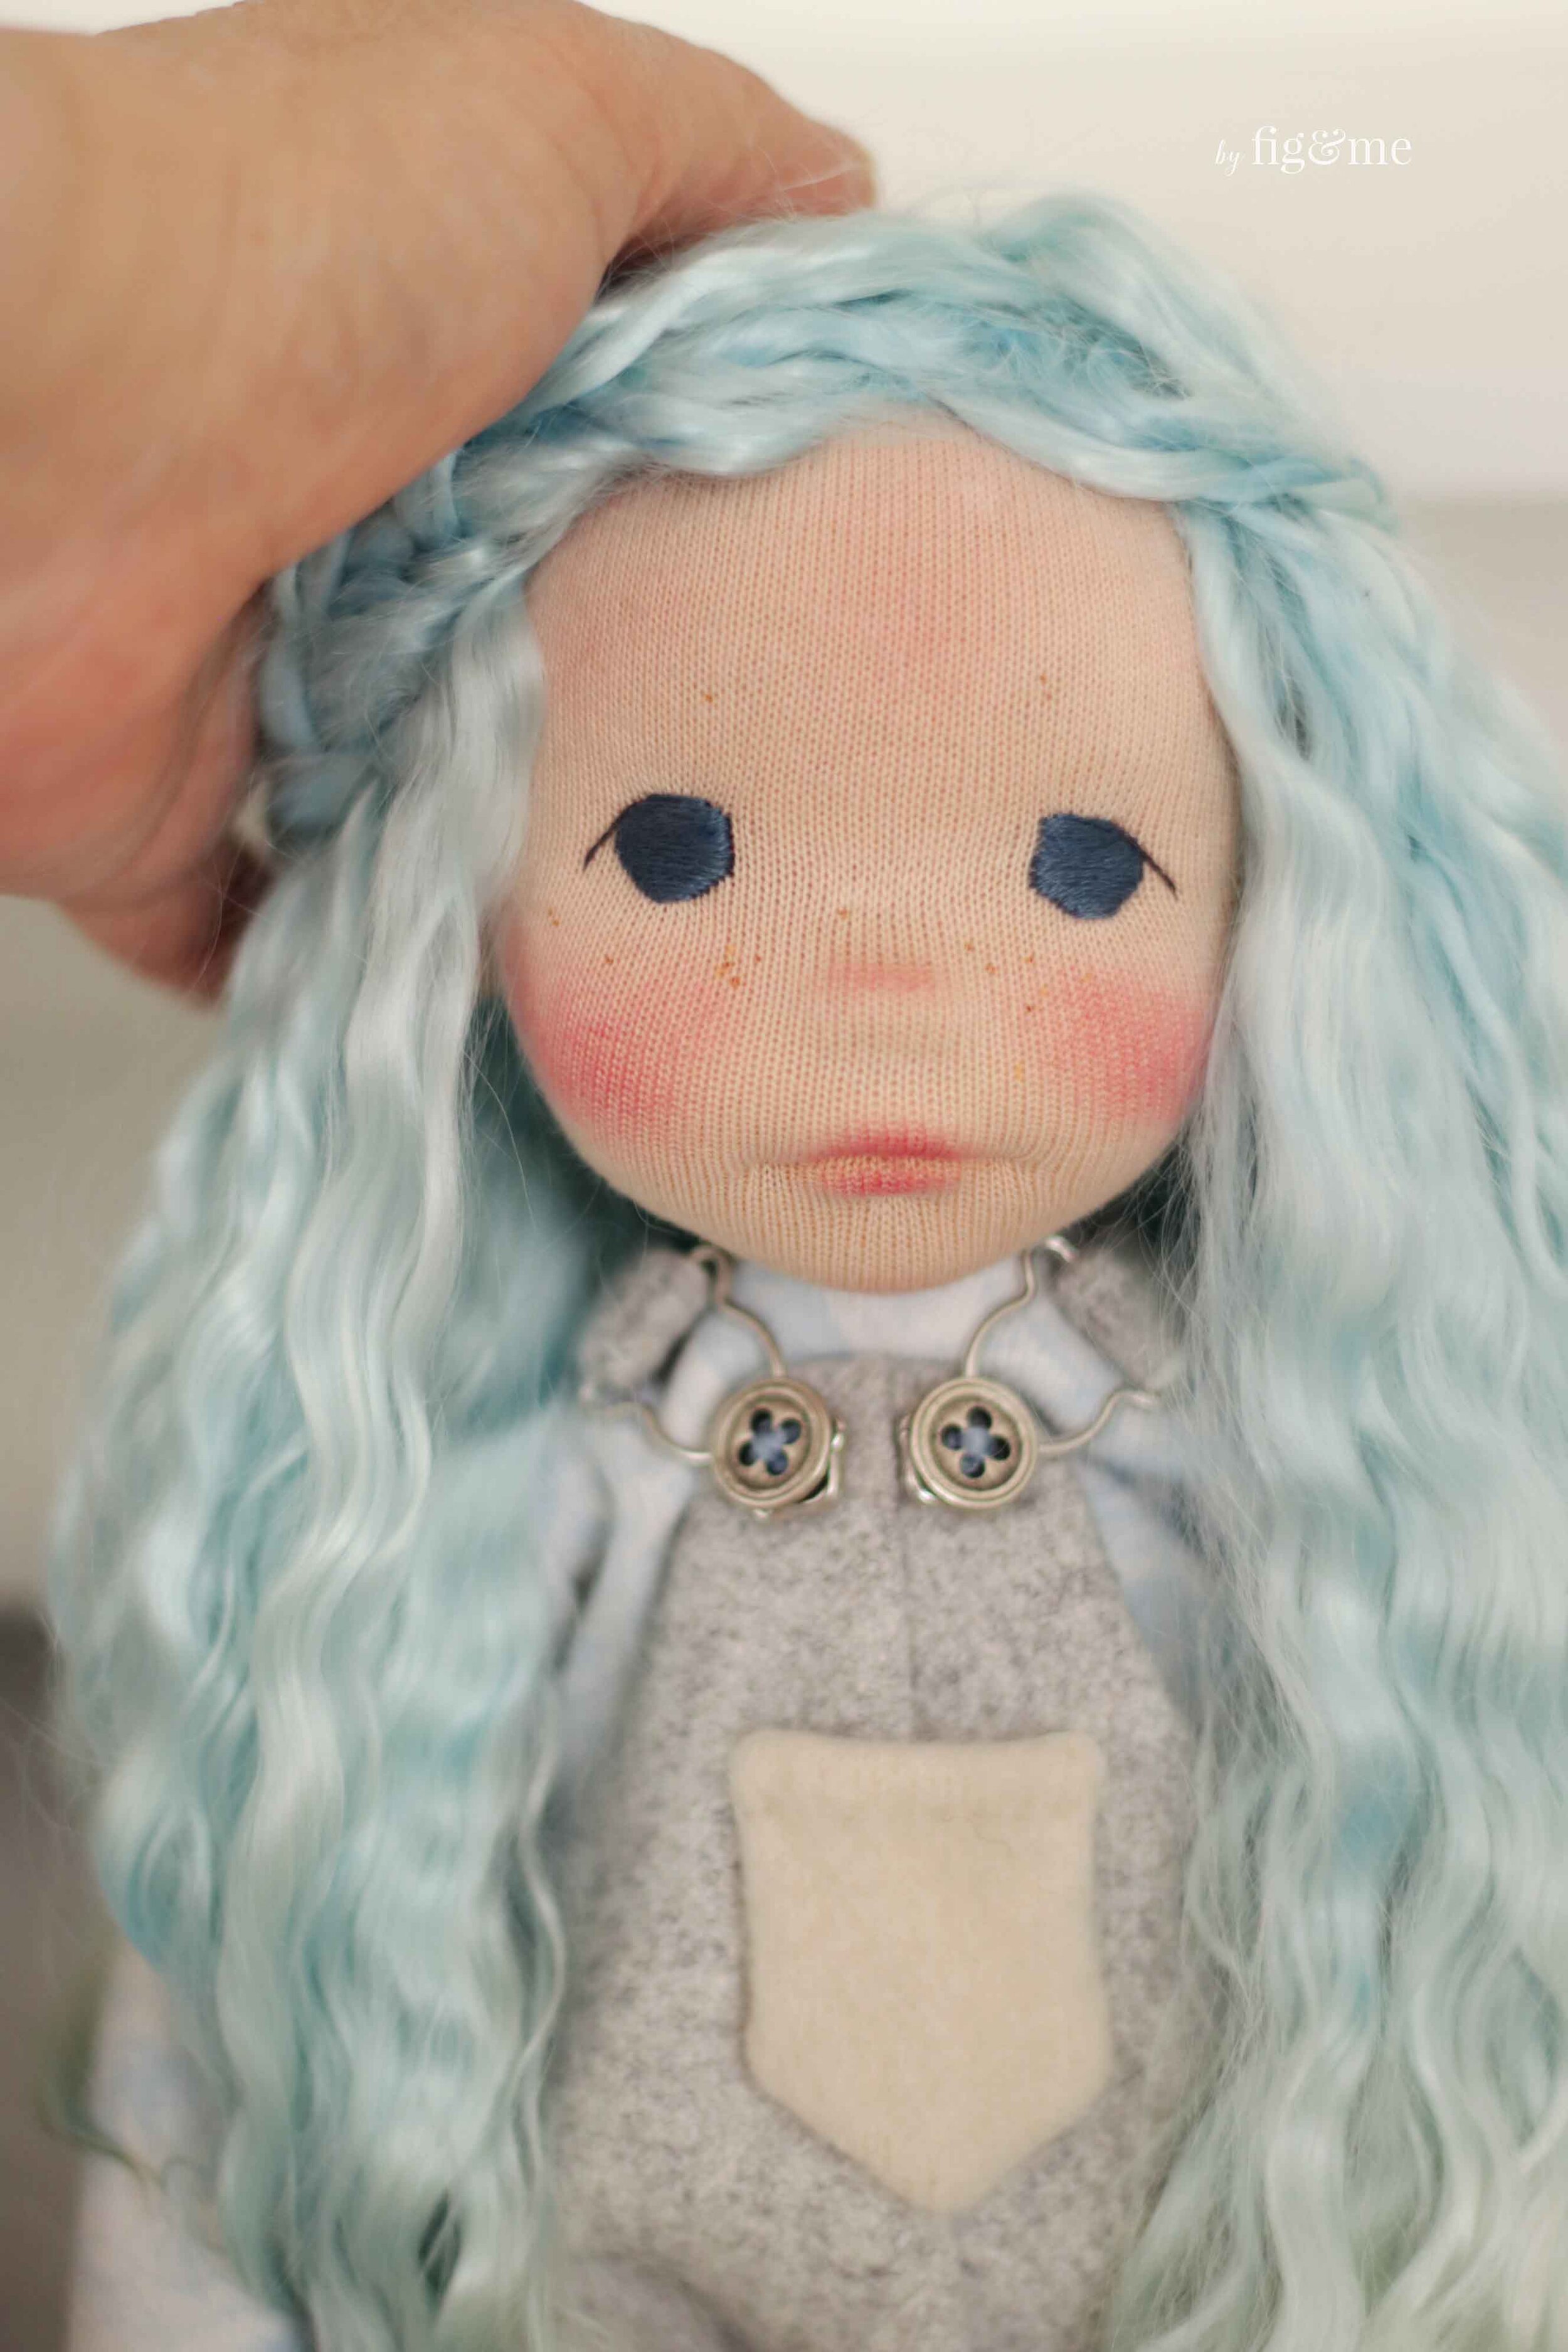 Blu and Mr Bear, a set of natural art dolls ready to play — fig & me